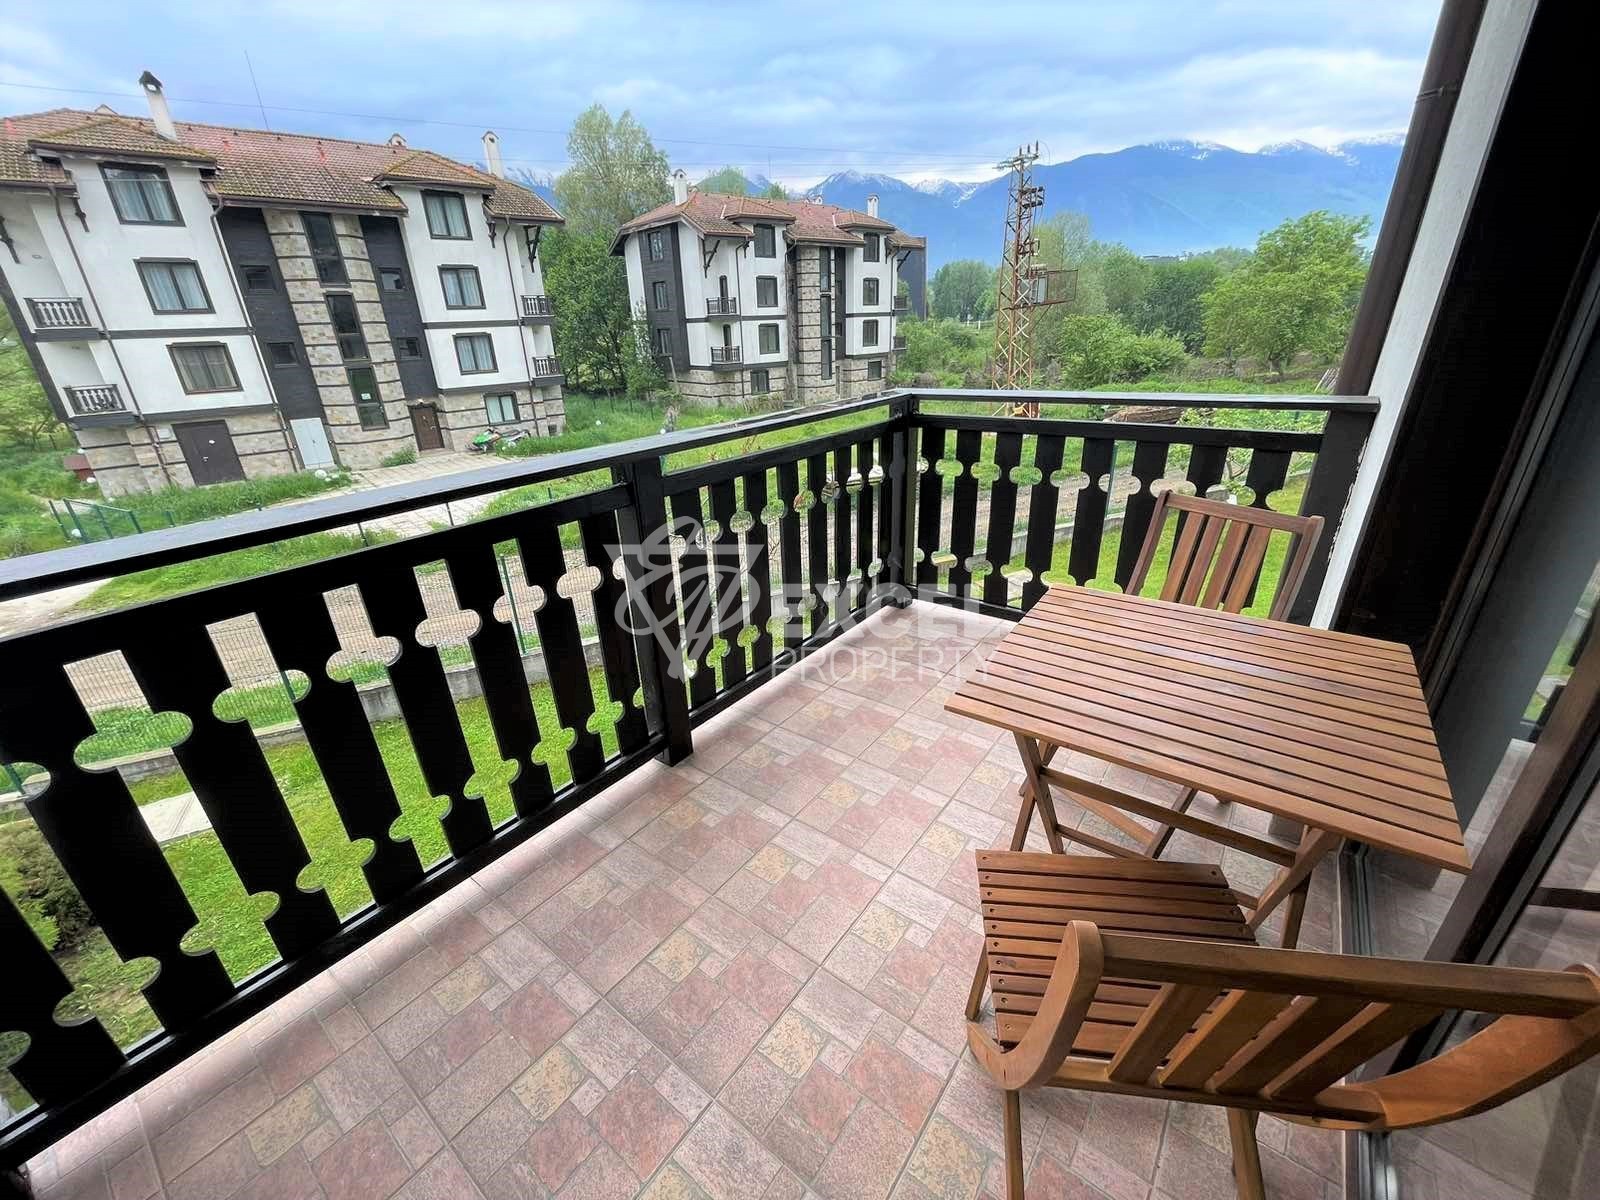 New furniture! One-bedroom apartment for sale in the hotel complex ”3 Mountains”